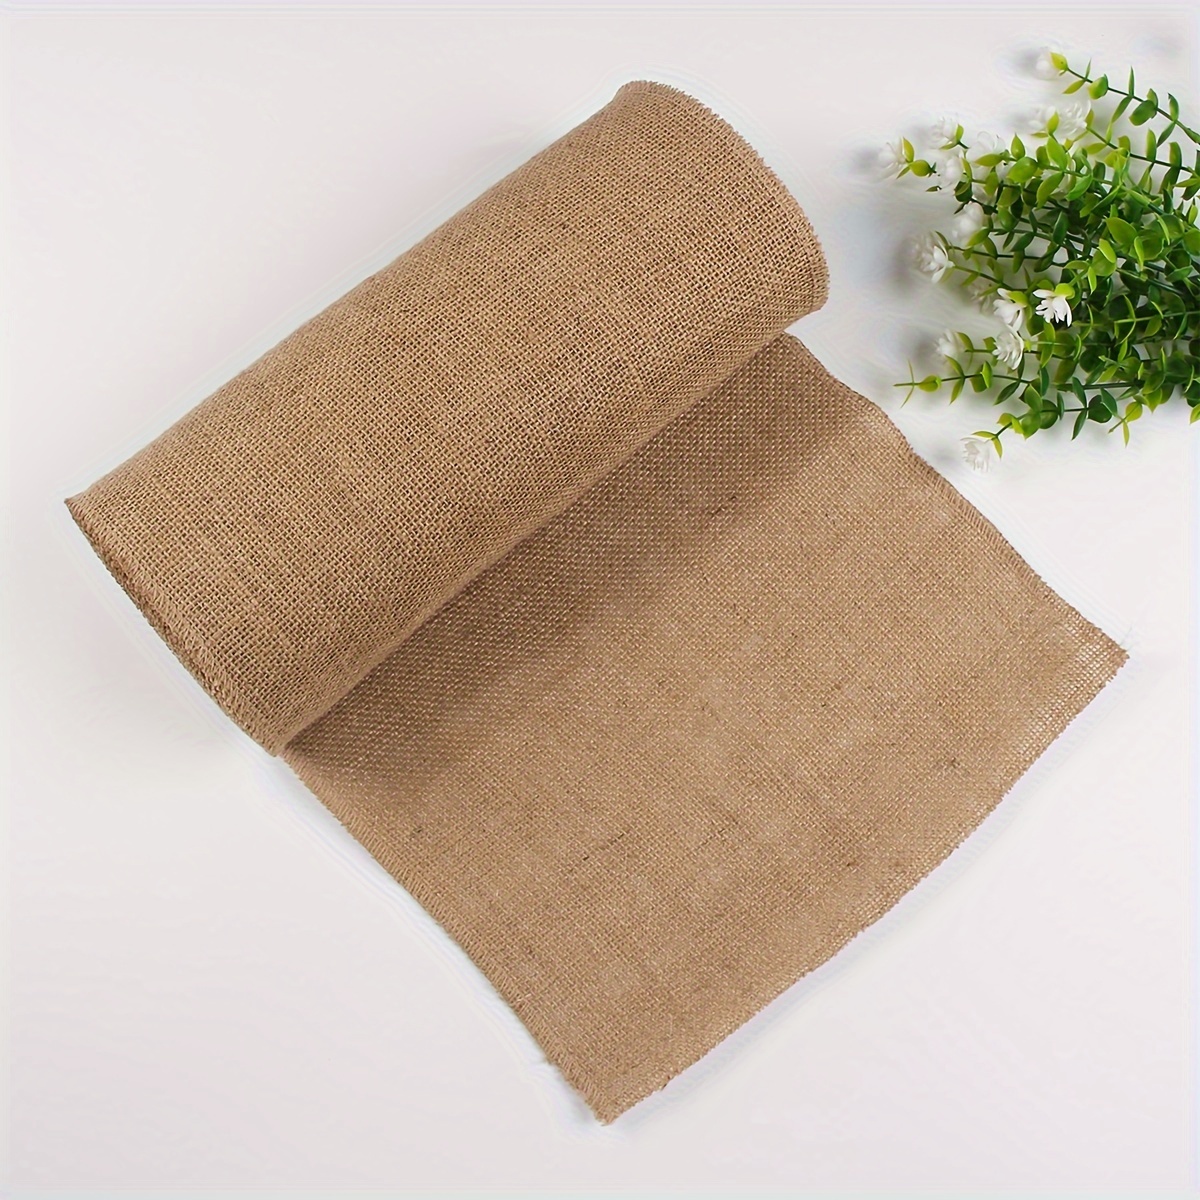 

Burlap Fabric Ribbon Roll For Diy Crafts And Decor - Natural Jute Material, 11.8 Inches Wide, 16.4 Feet Long (5m) - Rustic Table Runner Cloth, Home & Wedding Decorations